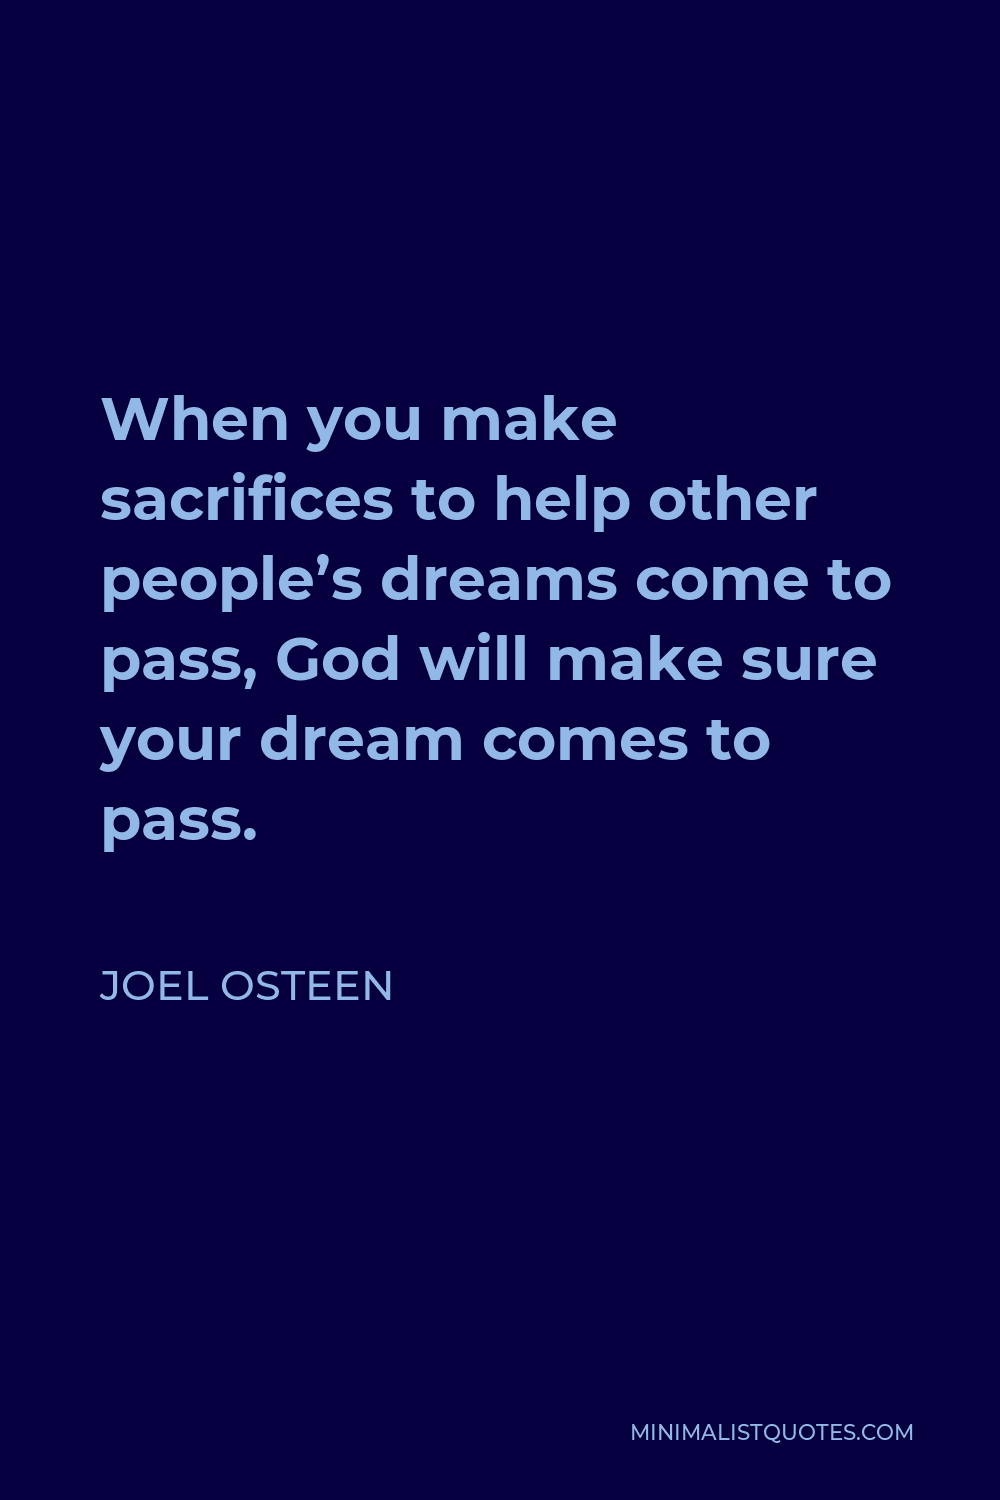 Joel Osteen Quote - When you make sacrifices to help other people’s dreams come to pass, God will make sure your dream comes to pass.